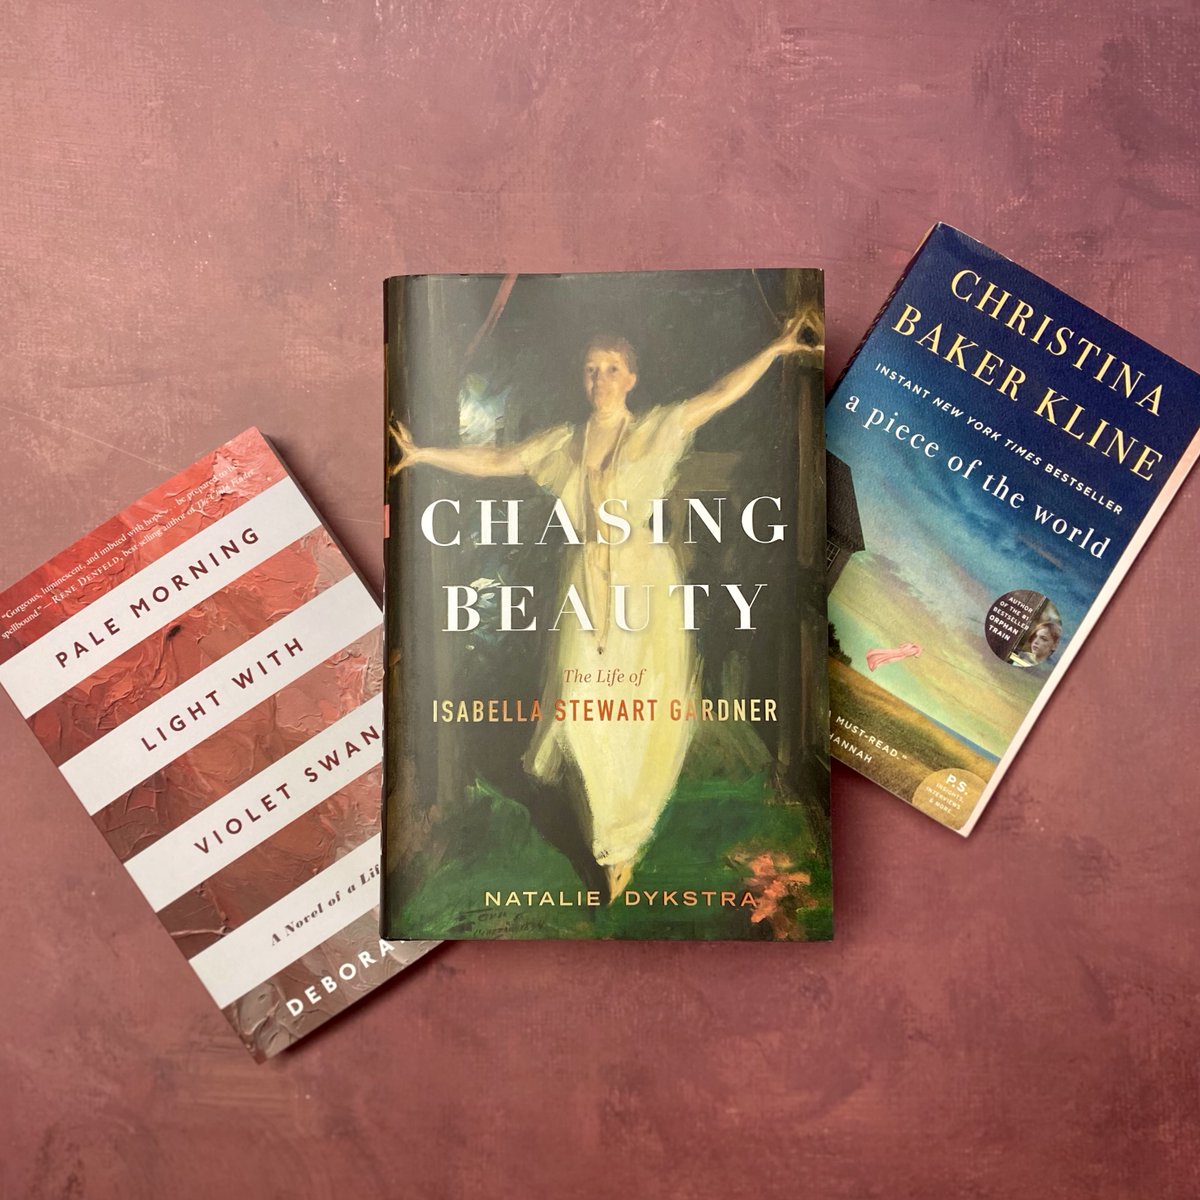 We're celebrating #WorldArtDay with the art of a good book.🎨📚 Here are a few of our fav that discuss art and artists including the newly released Chasing Beauty by @natalieanneDY, the story of Isabella Stewart Gardner—creator of one of America’s most stunning museums.